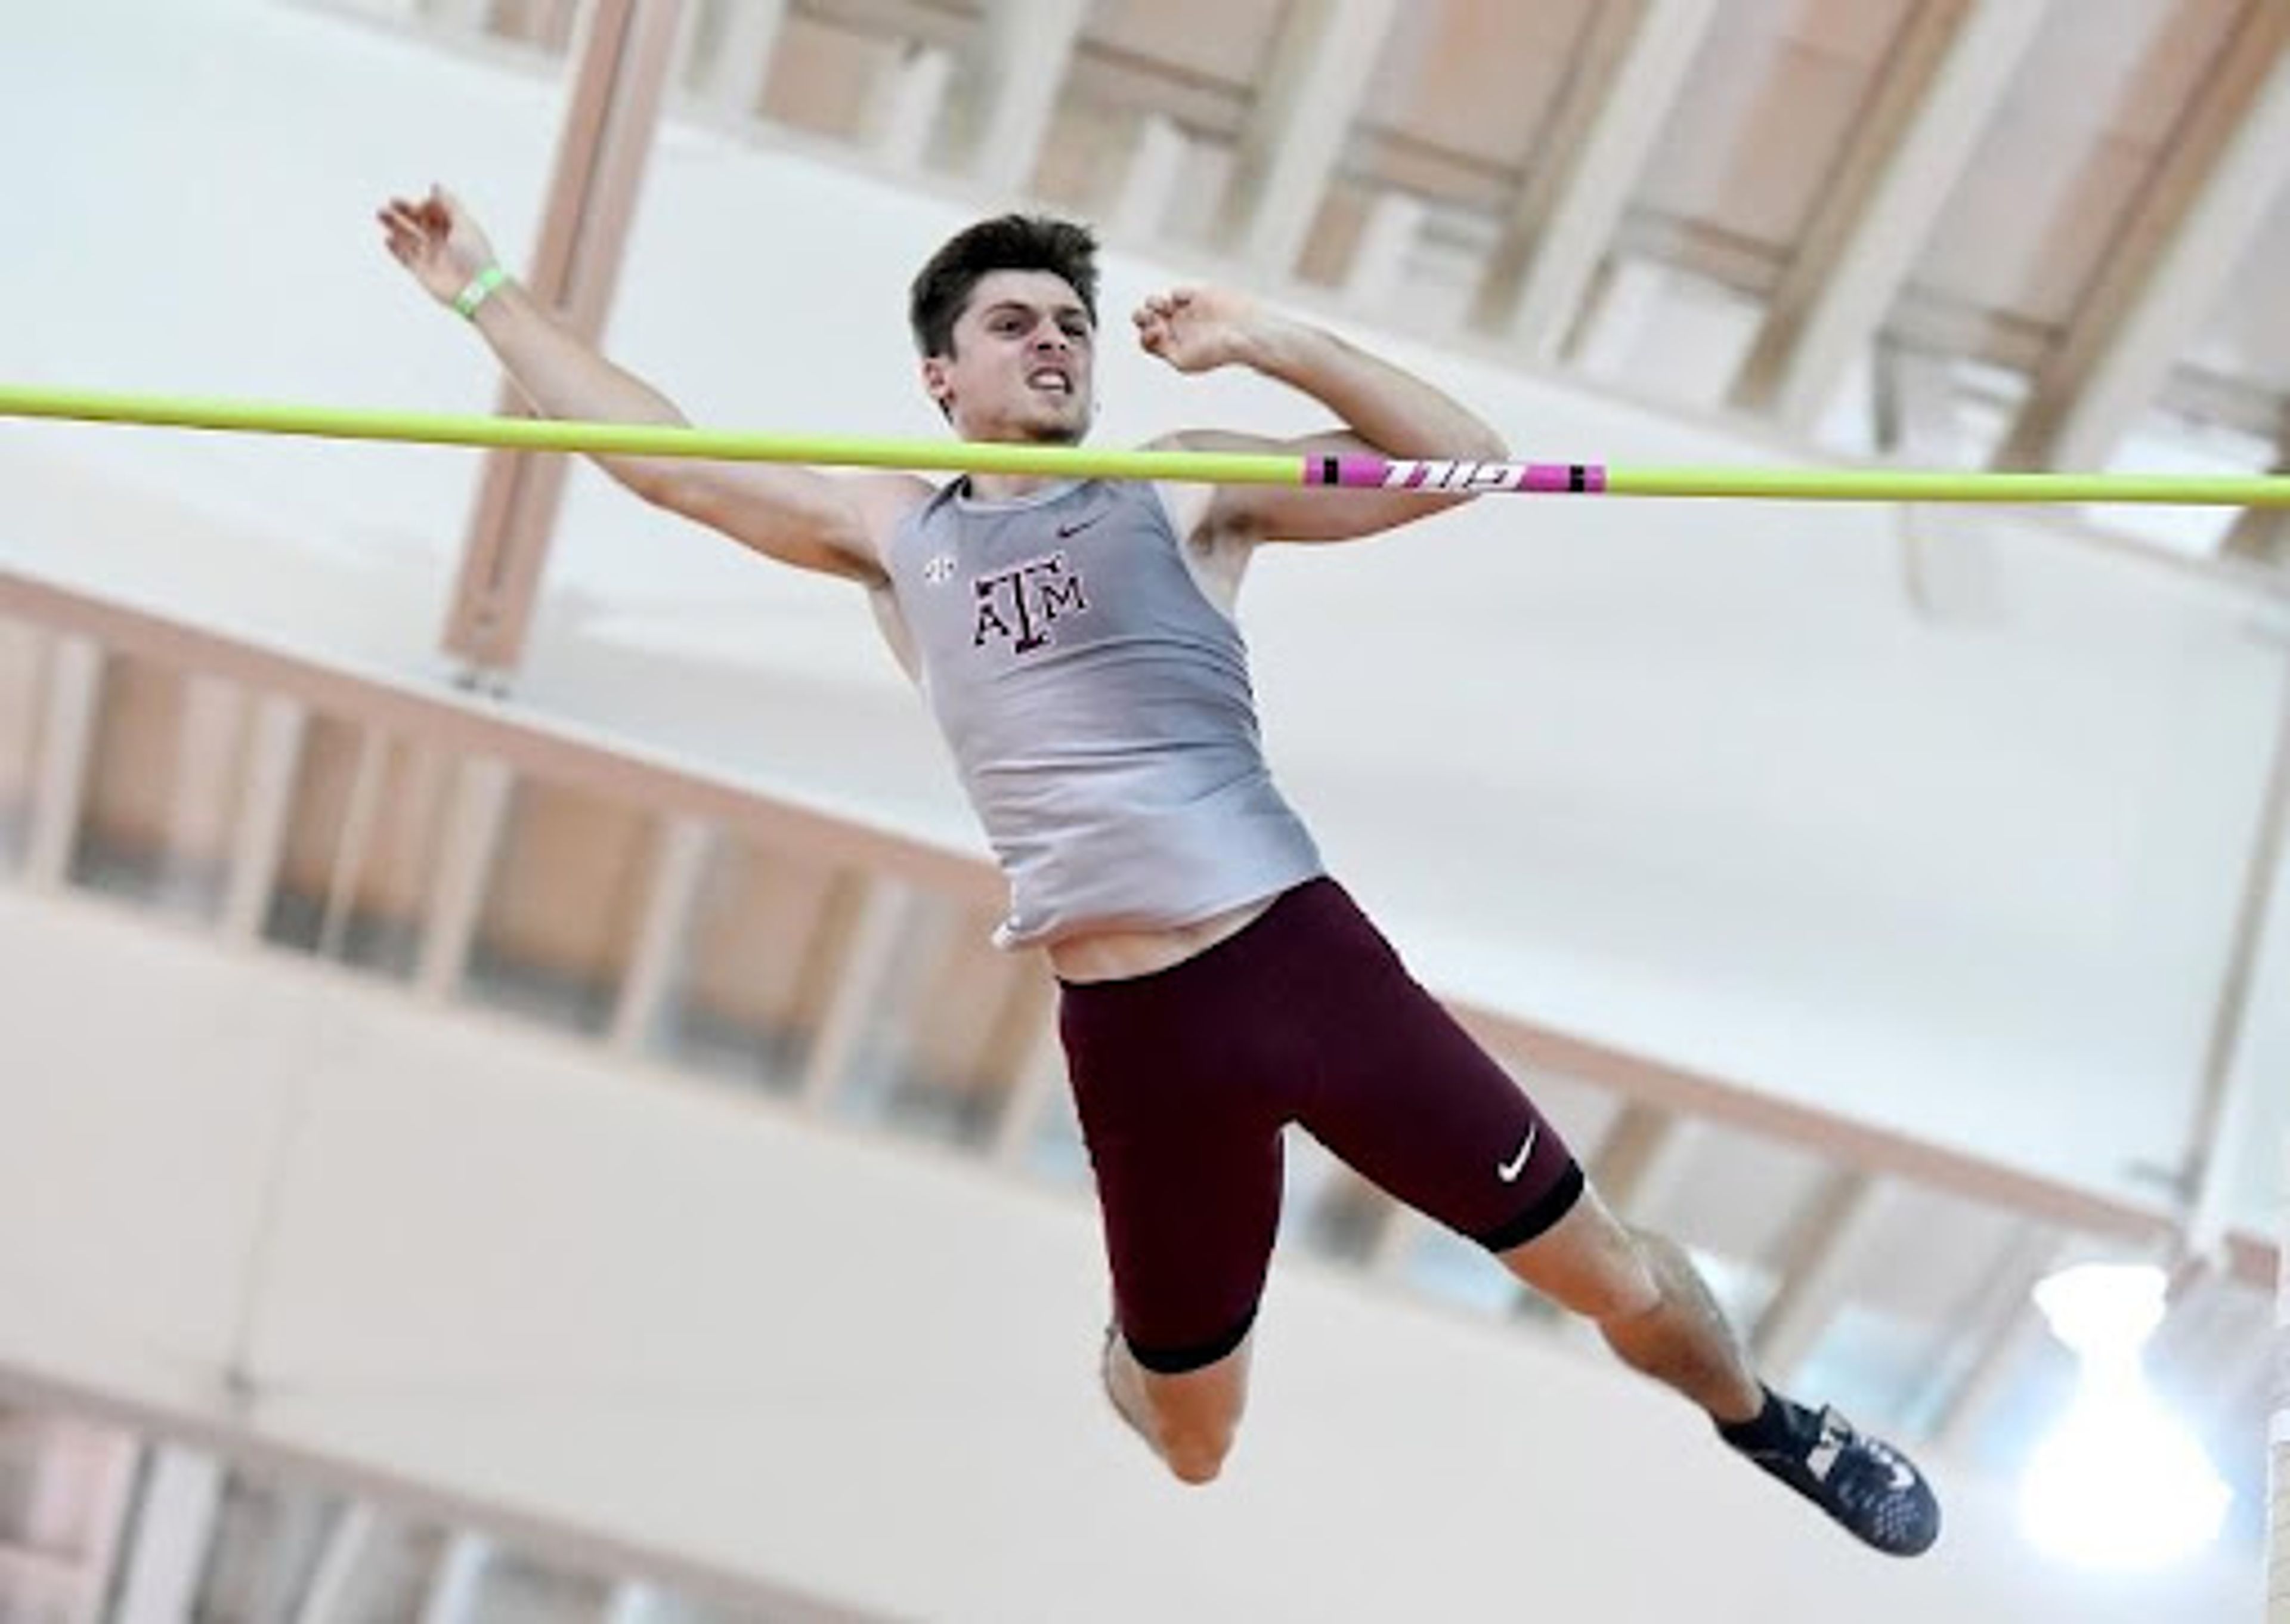 Jacob Wooten Pole Vaulter: From Texas High School Star to Olympic Contender